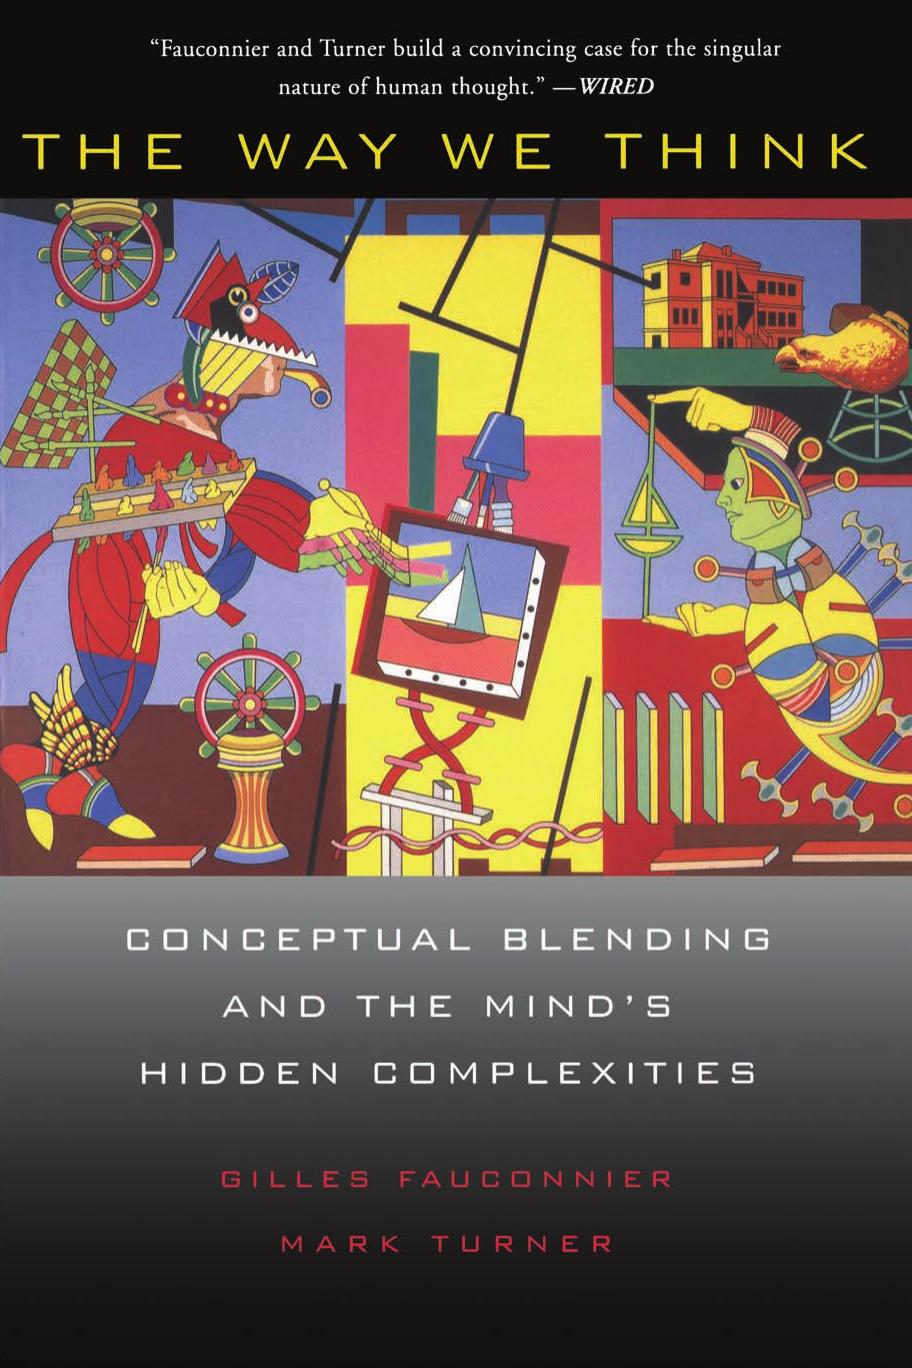 The Way We Think: Conceptual Blending and the Mind's Hidden Complexities by Gilles Fauconnier & Mark Turner